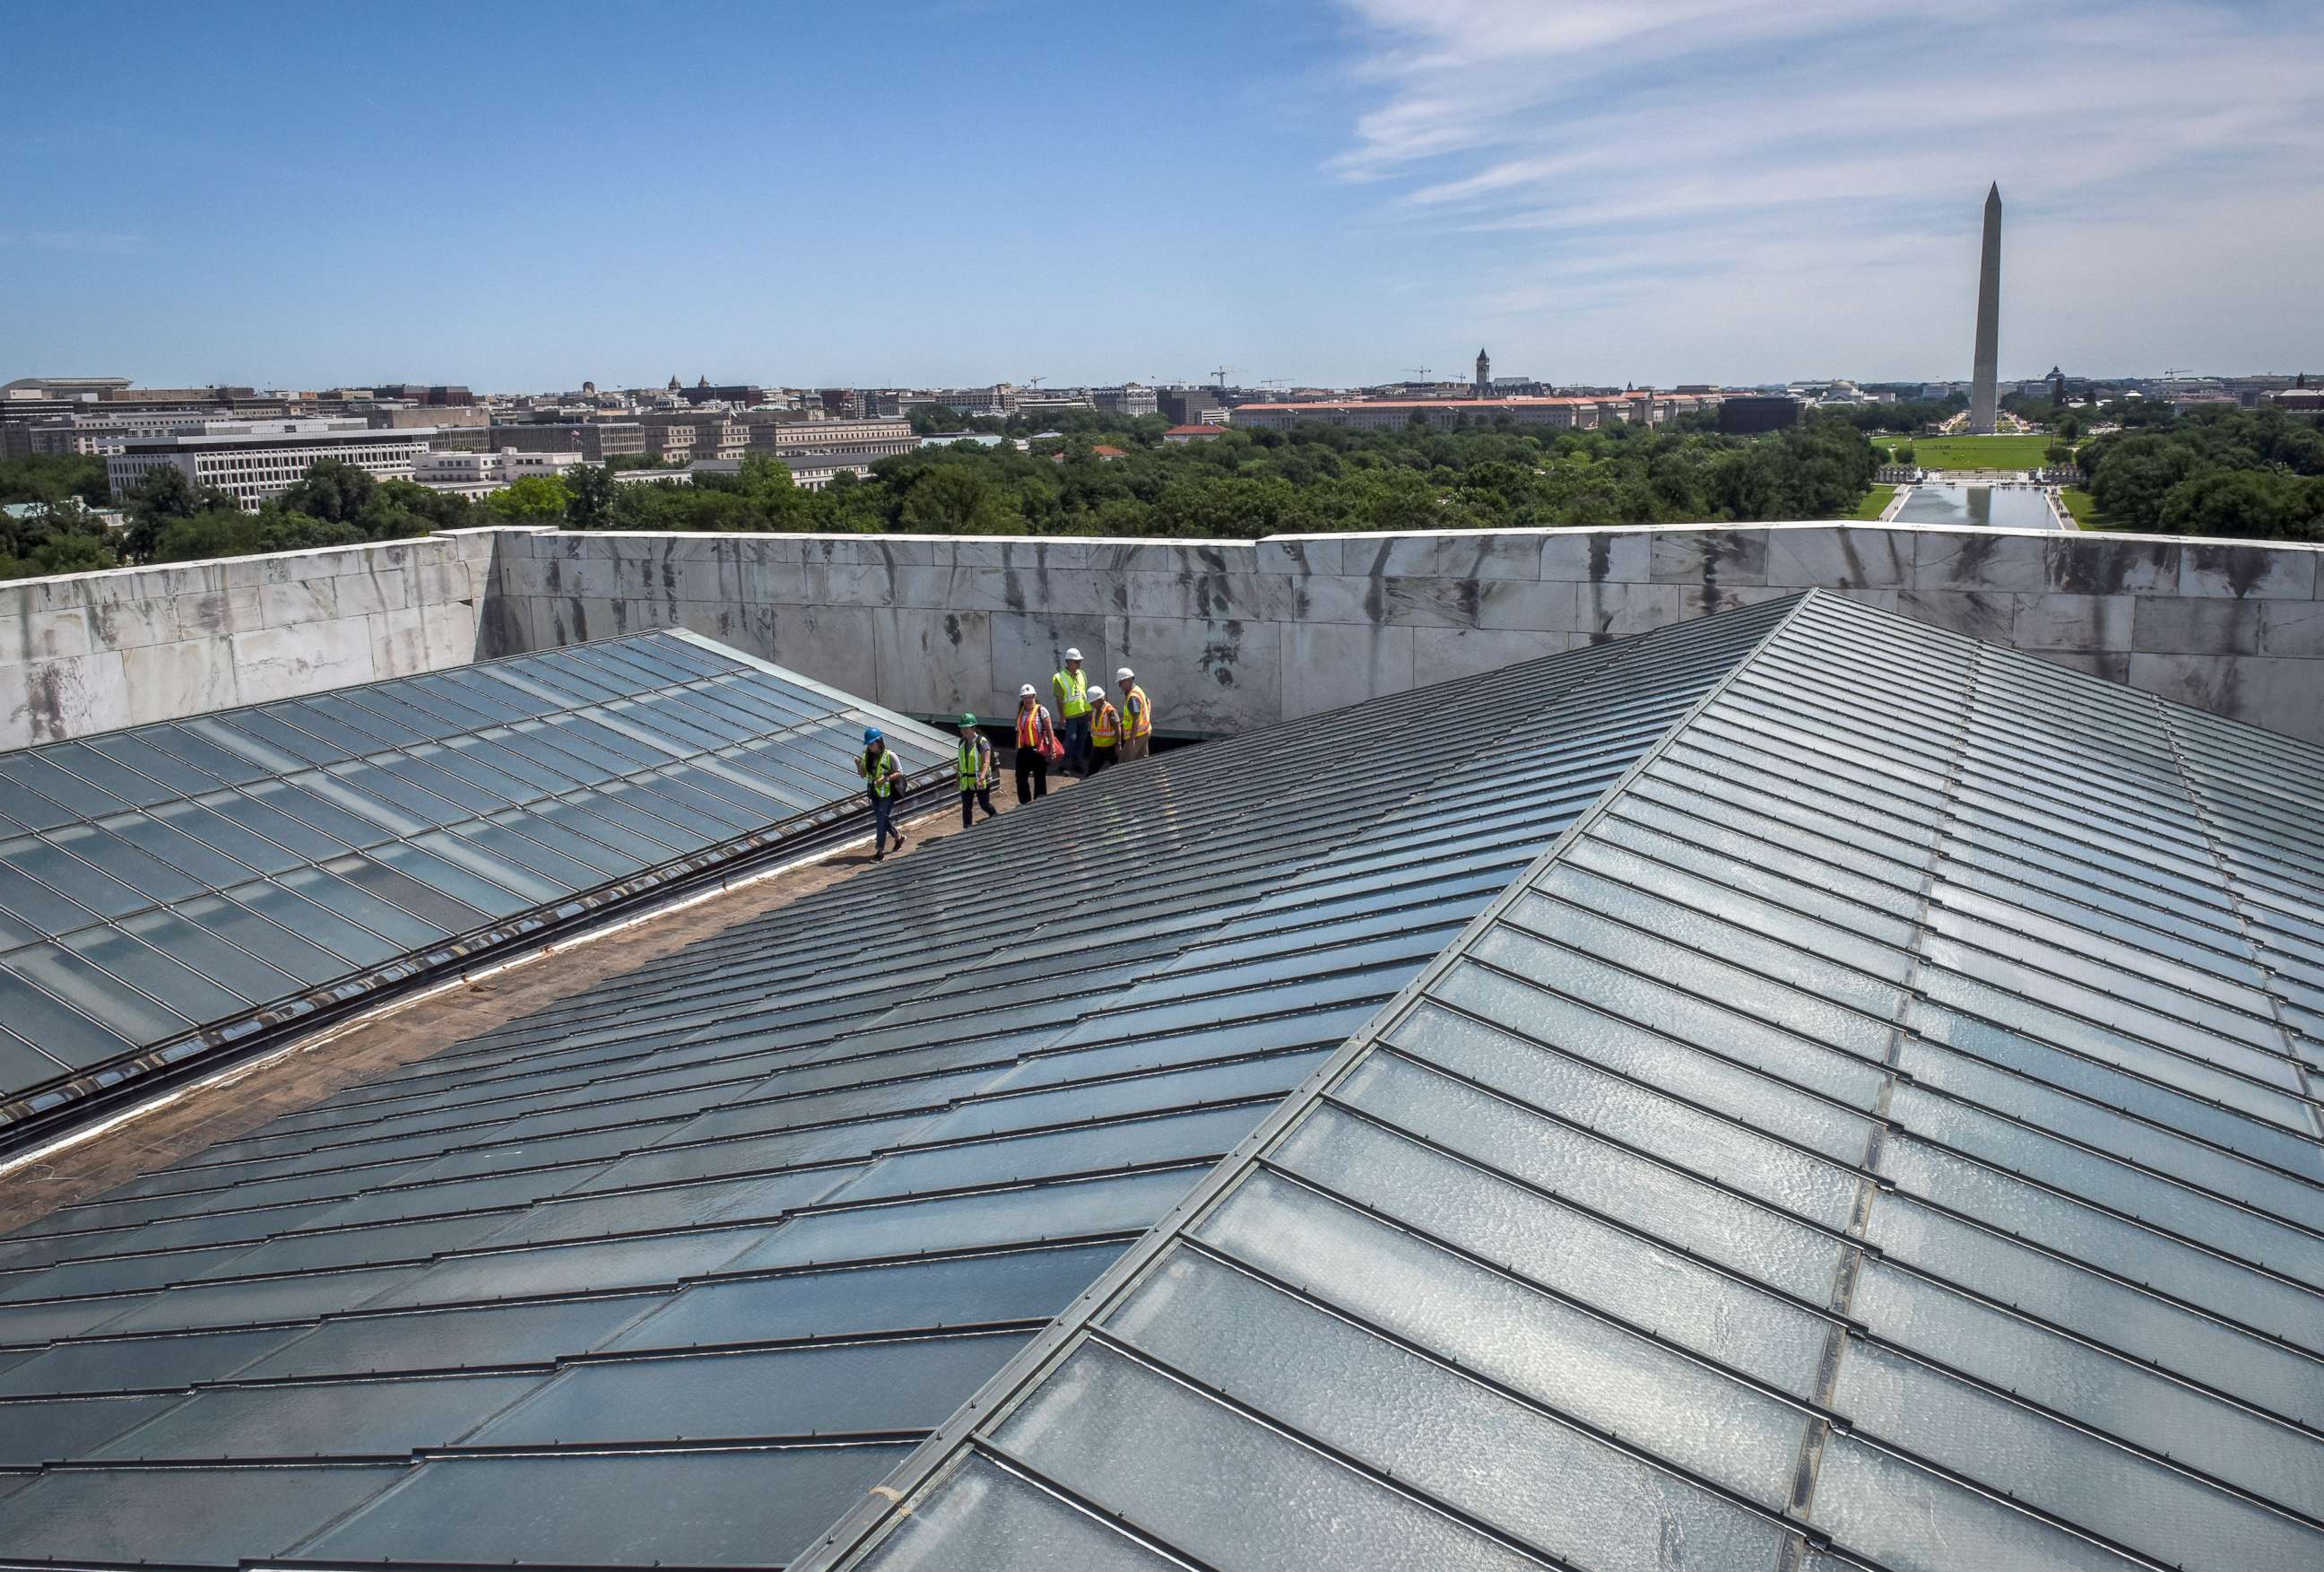 PHOTO: Reporters and officials walk between the skylights on the roof during a tour of on-going work on the rehabilitation of the Lincoln memorial, June, 14, 2018, in Washington, DC.